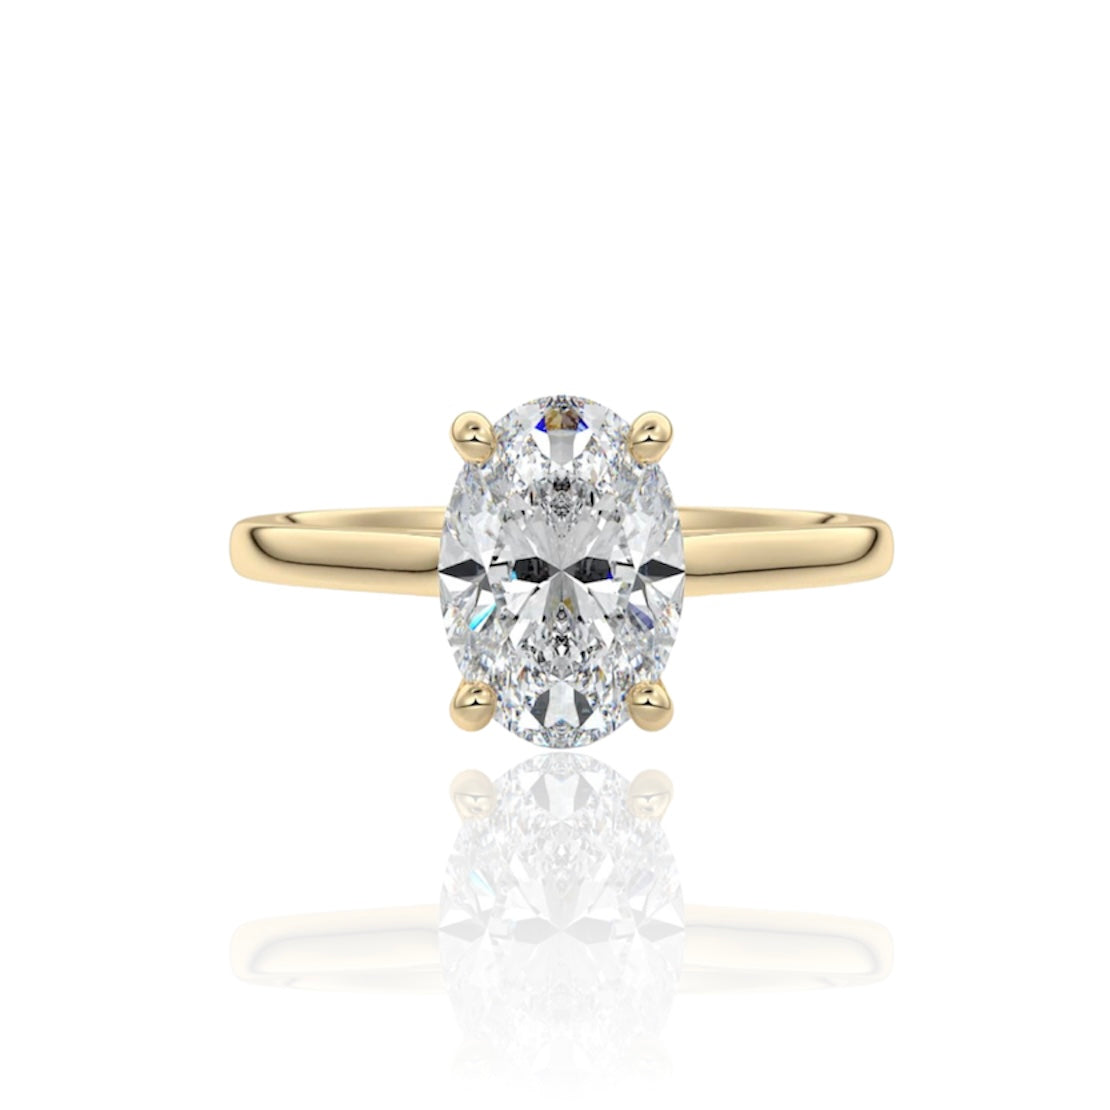 SERENA GOLD SOLITAIRE RING